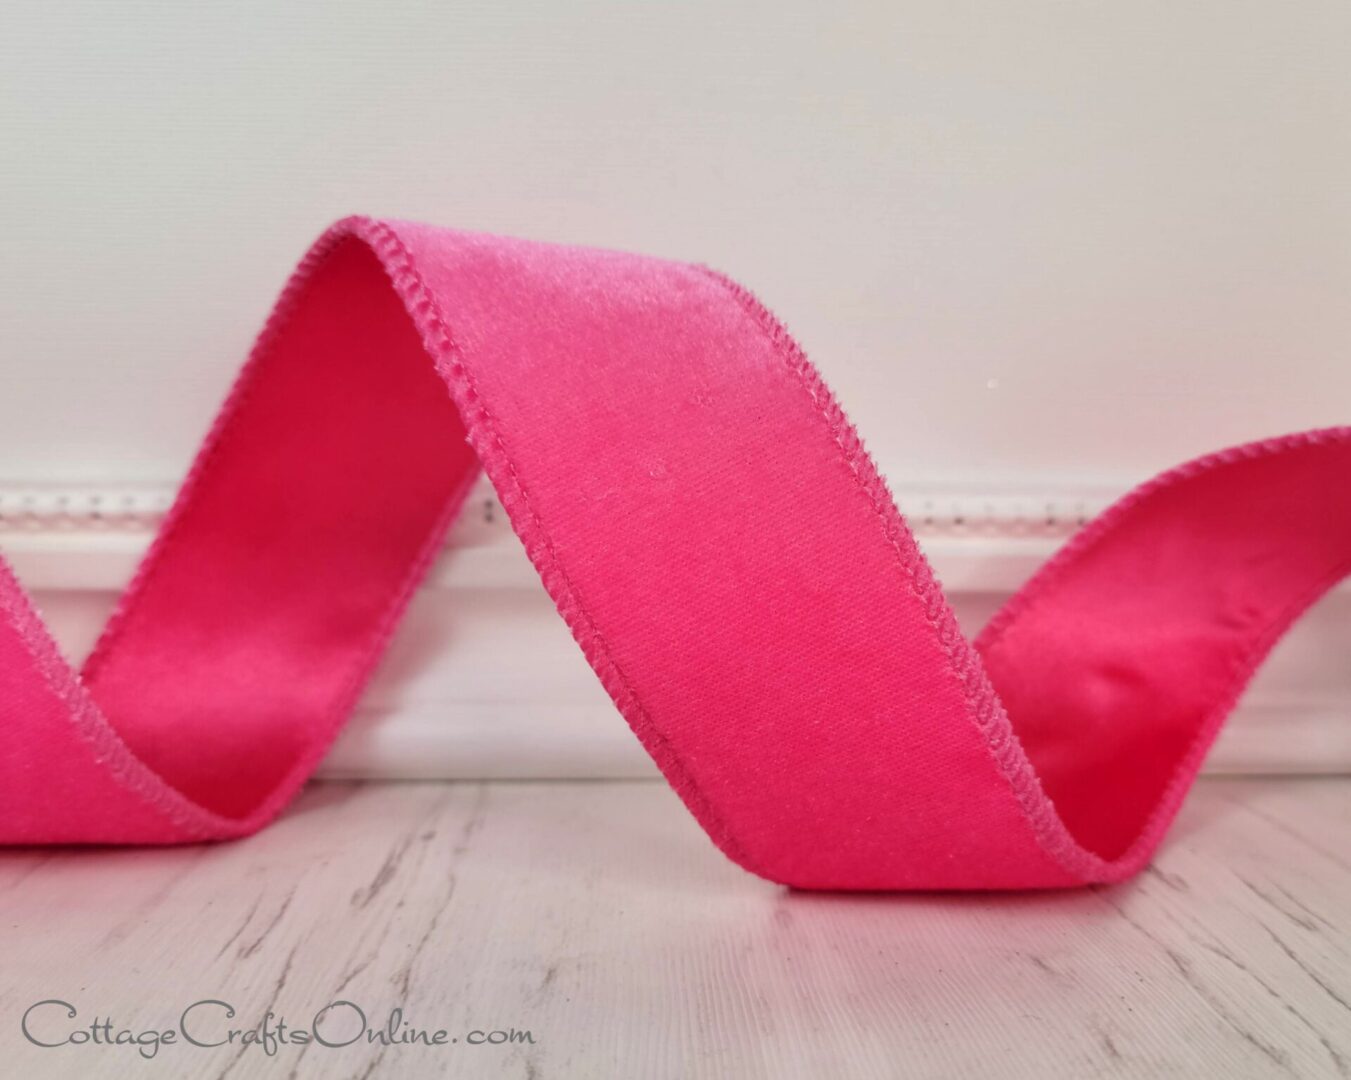 A pink ribbon is curled up on the floor.